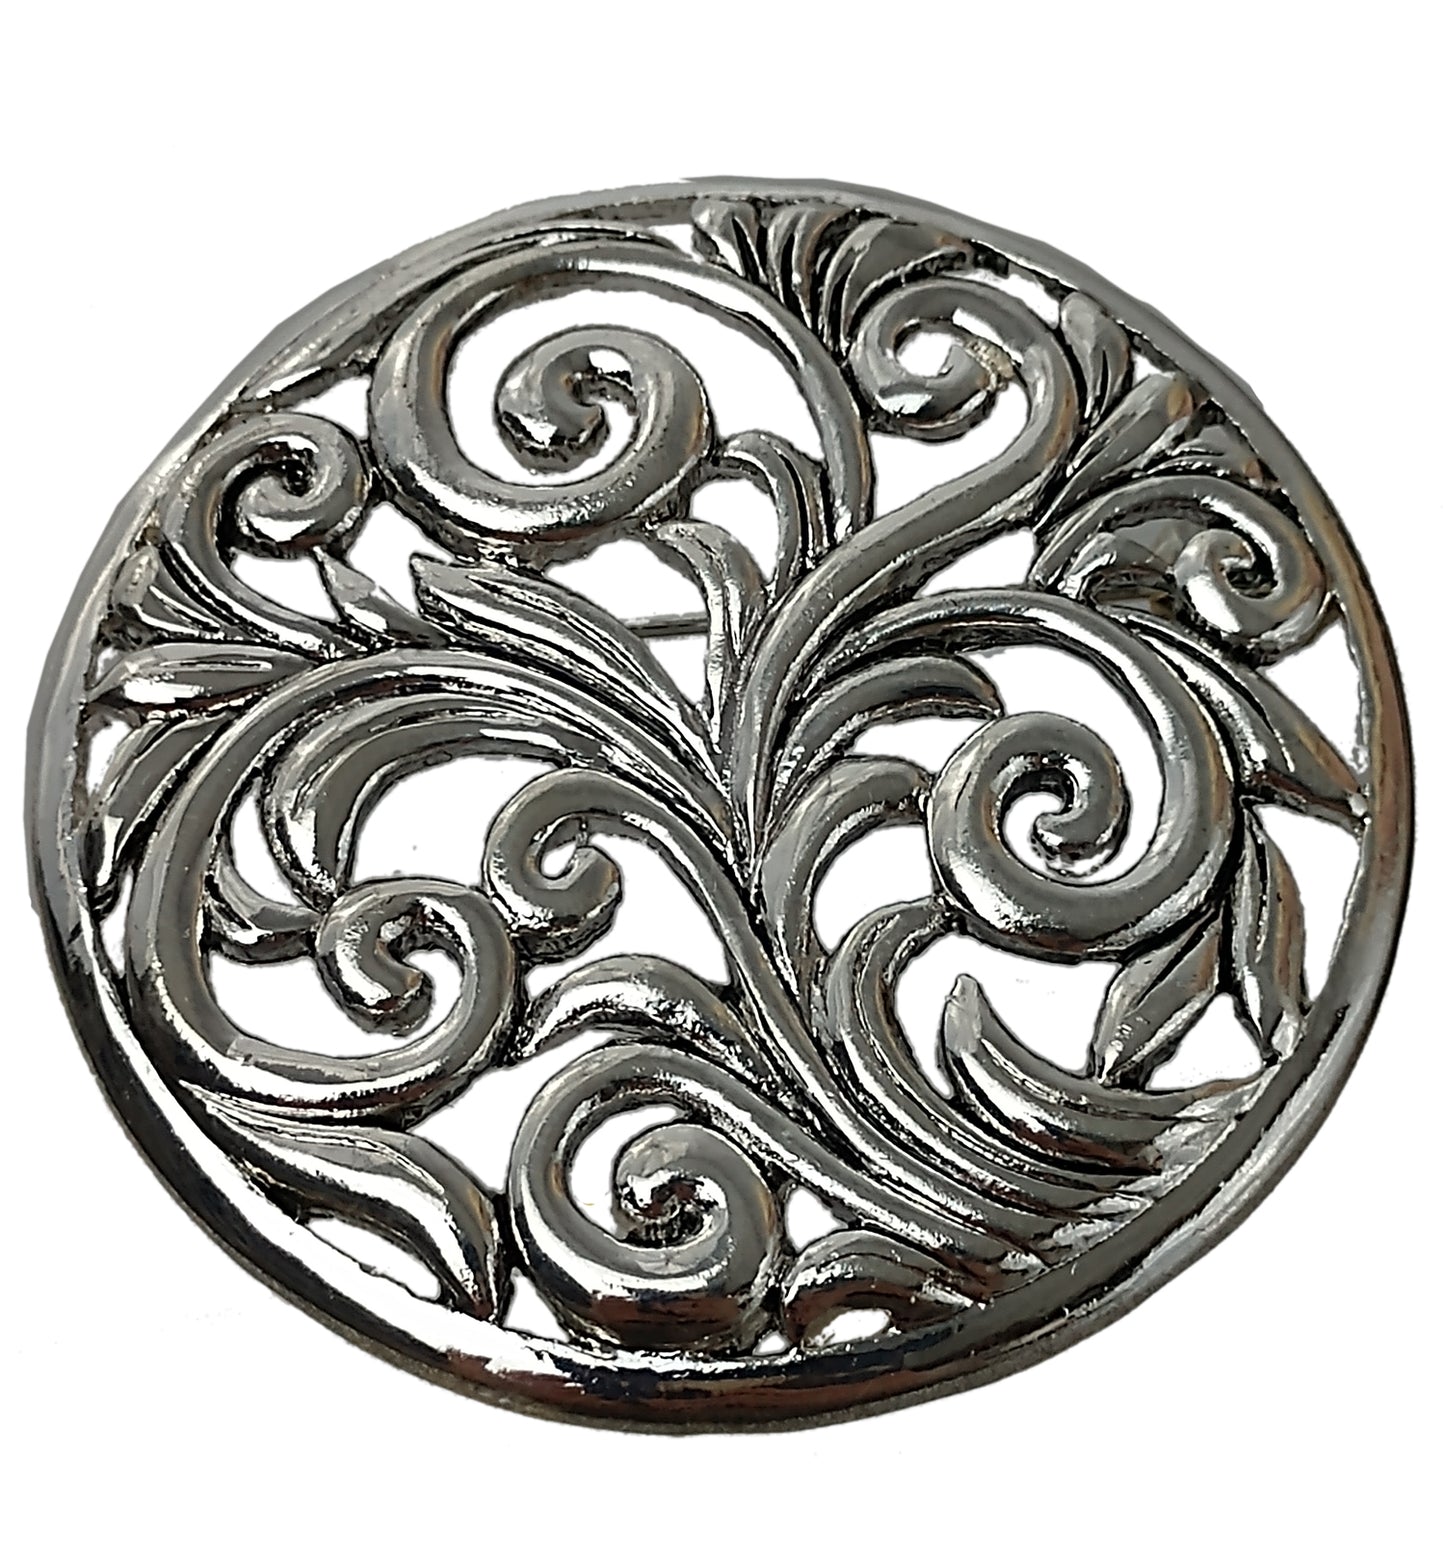 Silver Tone Openwork Leaves Nature Large Round Decorative Brooch Pin 1 3/4"